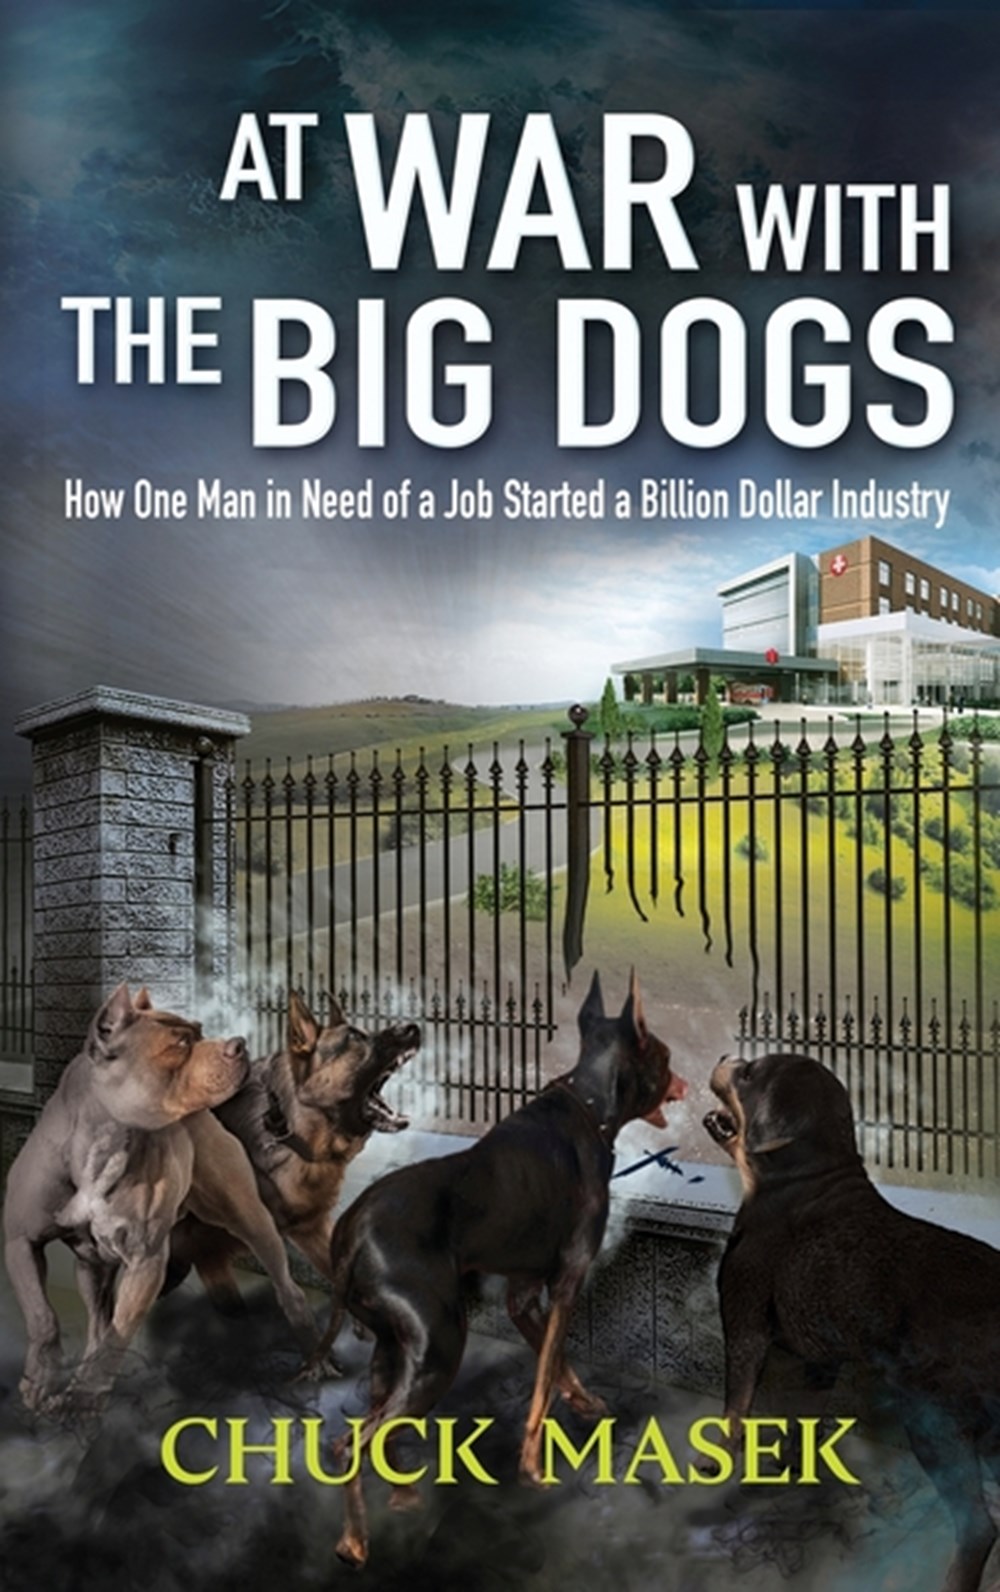 At War with the Big Dogs How One Man in Need of a Job Started a Billion Dollar Industry